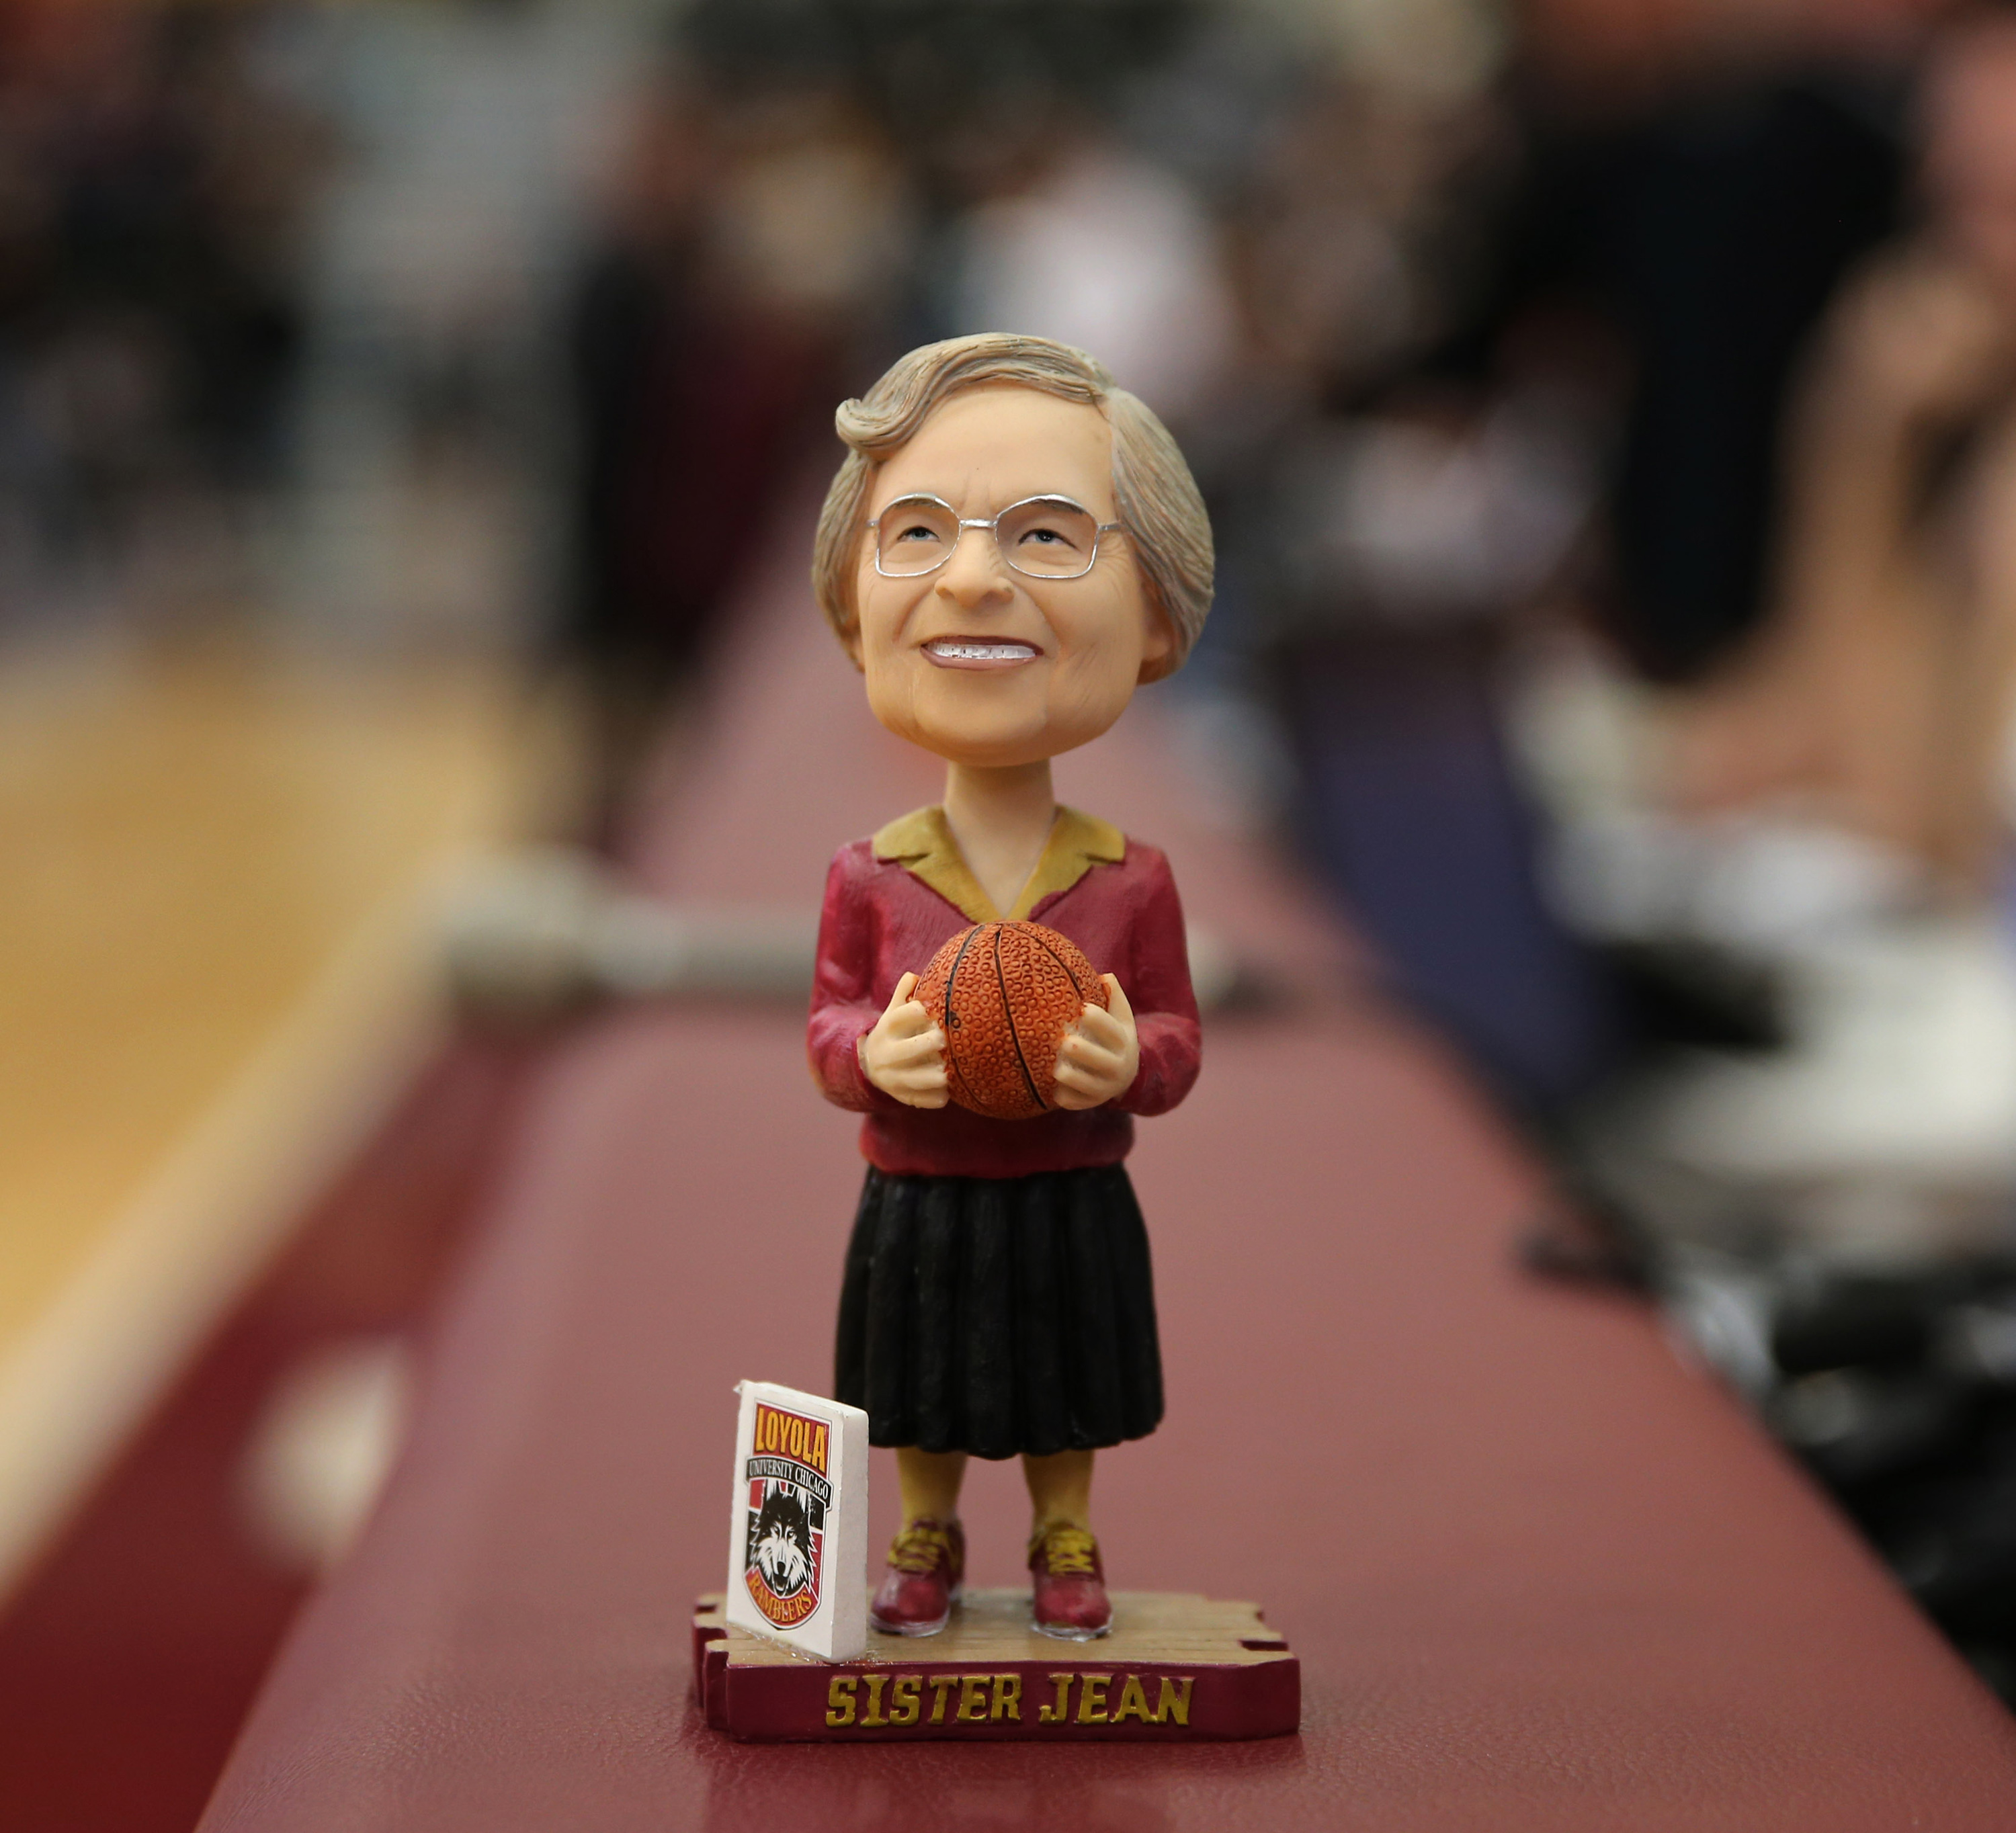 Sister Jean became very popular during the 2018 NCAA tournament.